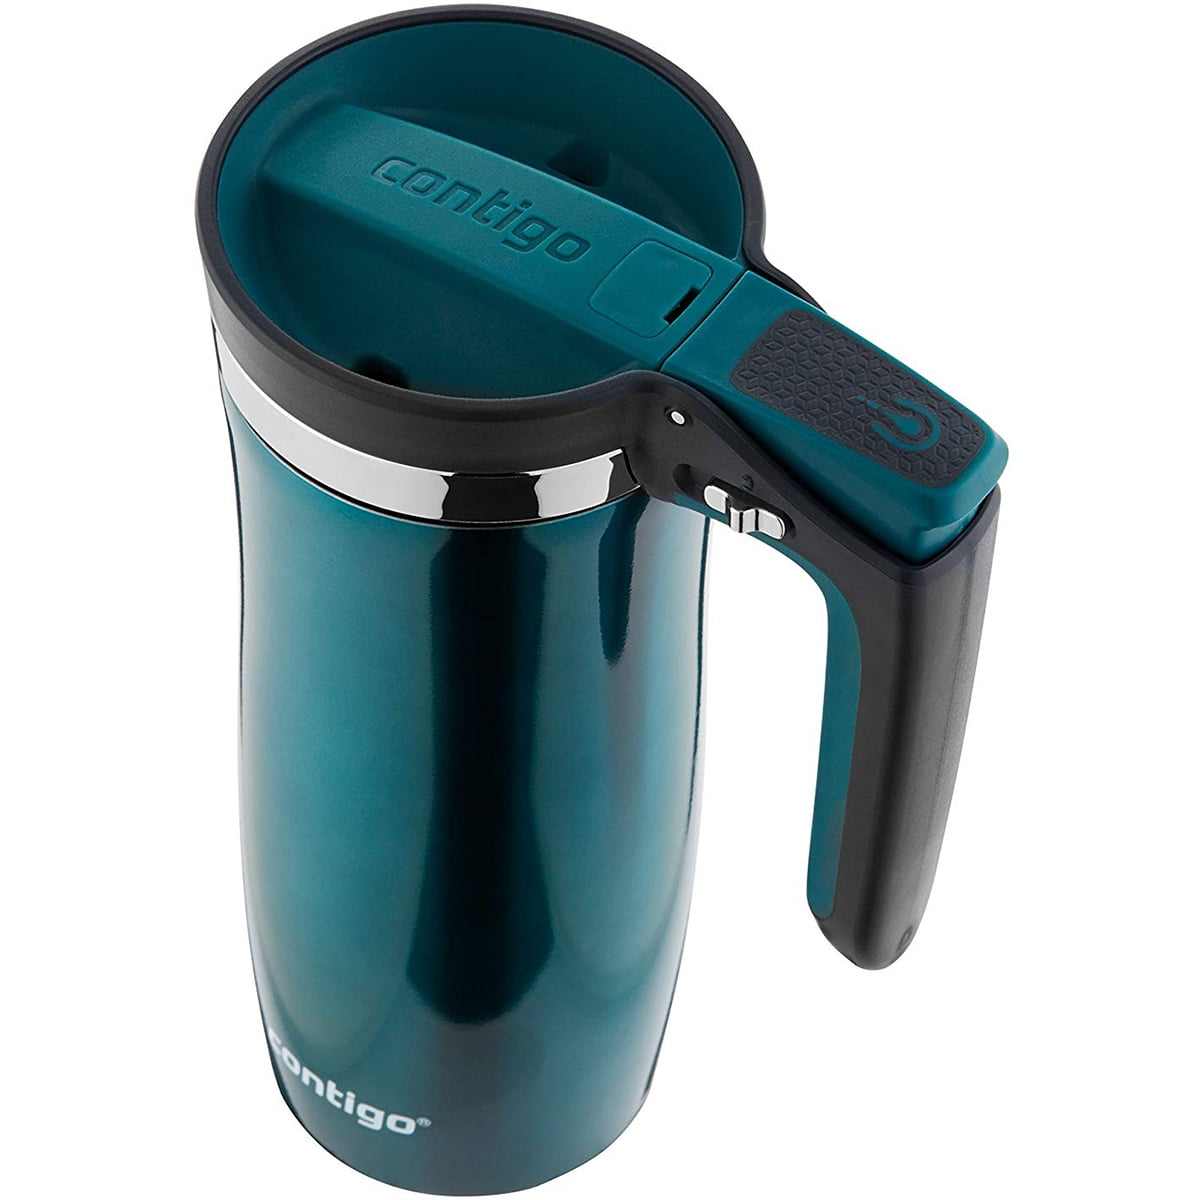 Contigo Stainless Steel Travel Mug with AUTOSEAL Lid and Handle Green, 16  fl oz. 